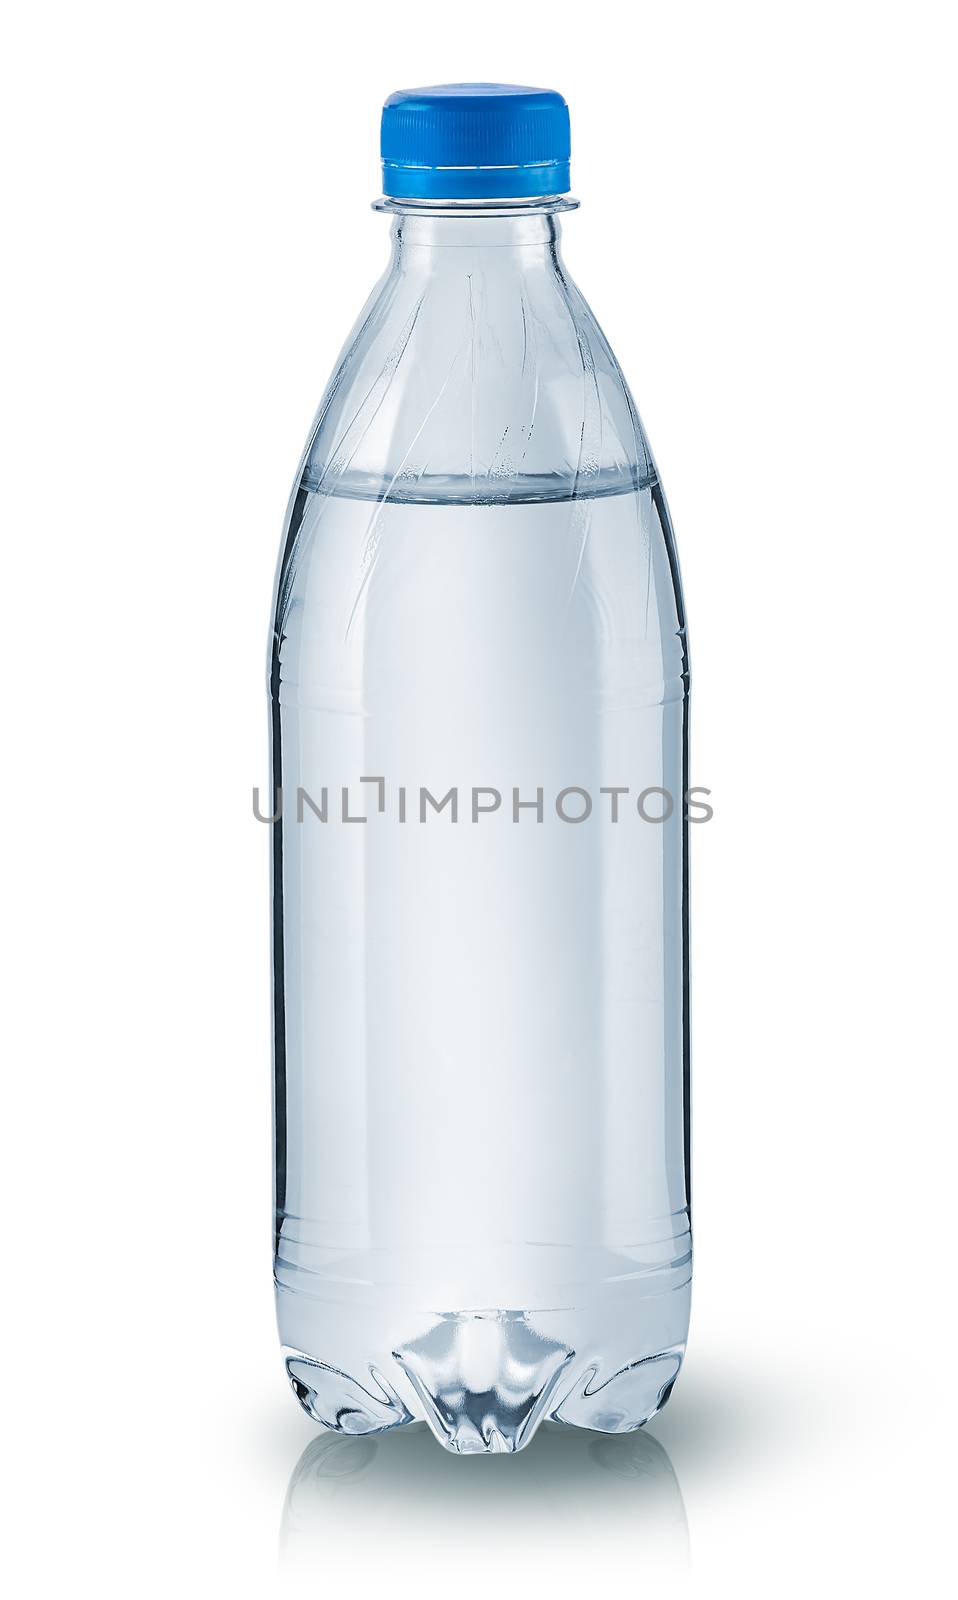 Closed plastic water bottle isolated on white background